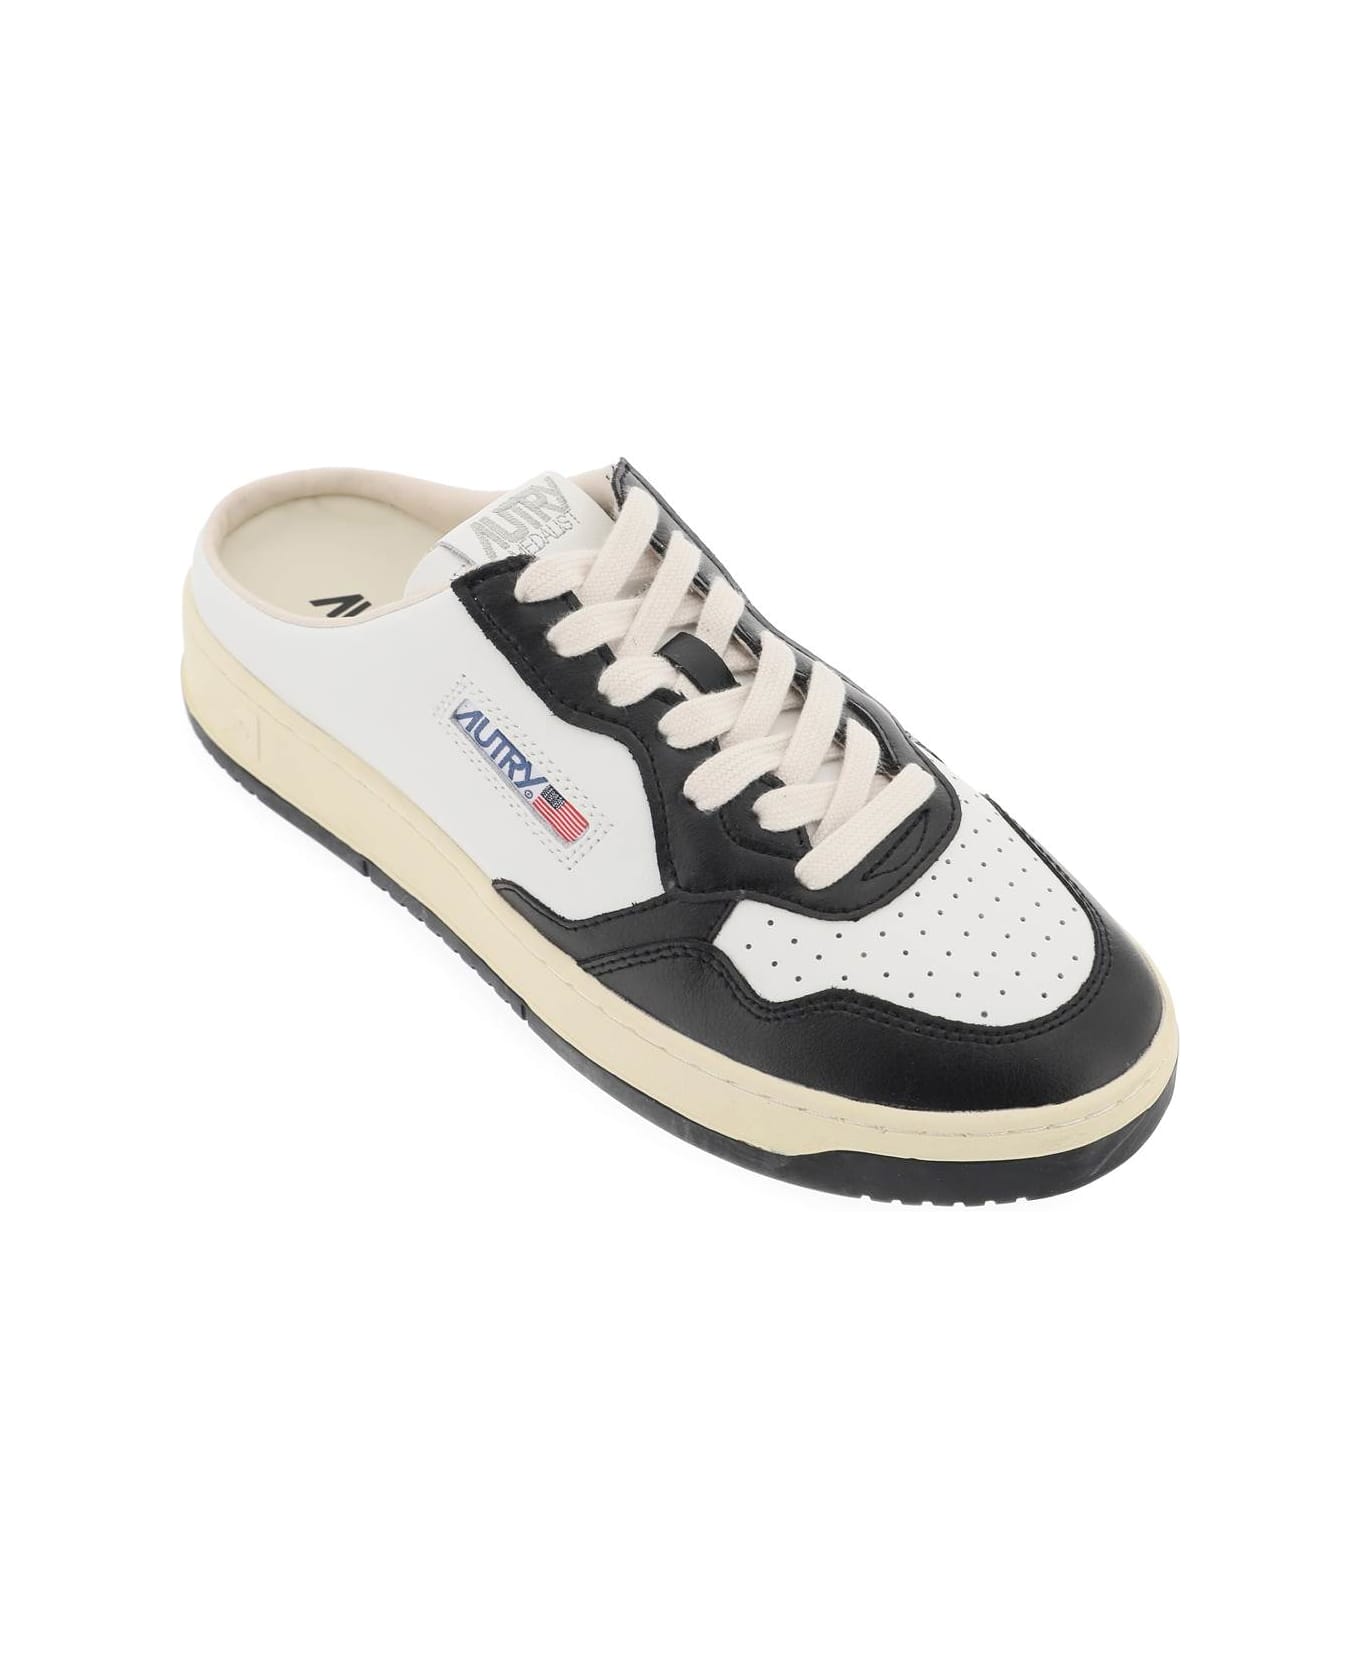 Autry Medalist Mule Low Sneakers - WHITE BLACK (White)